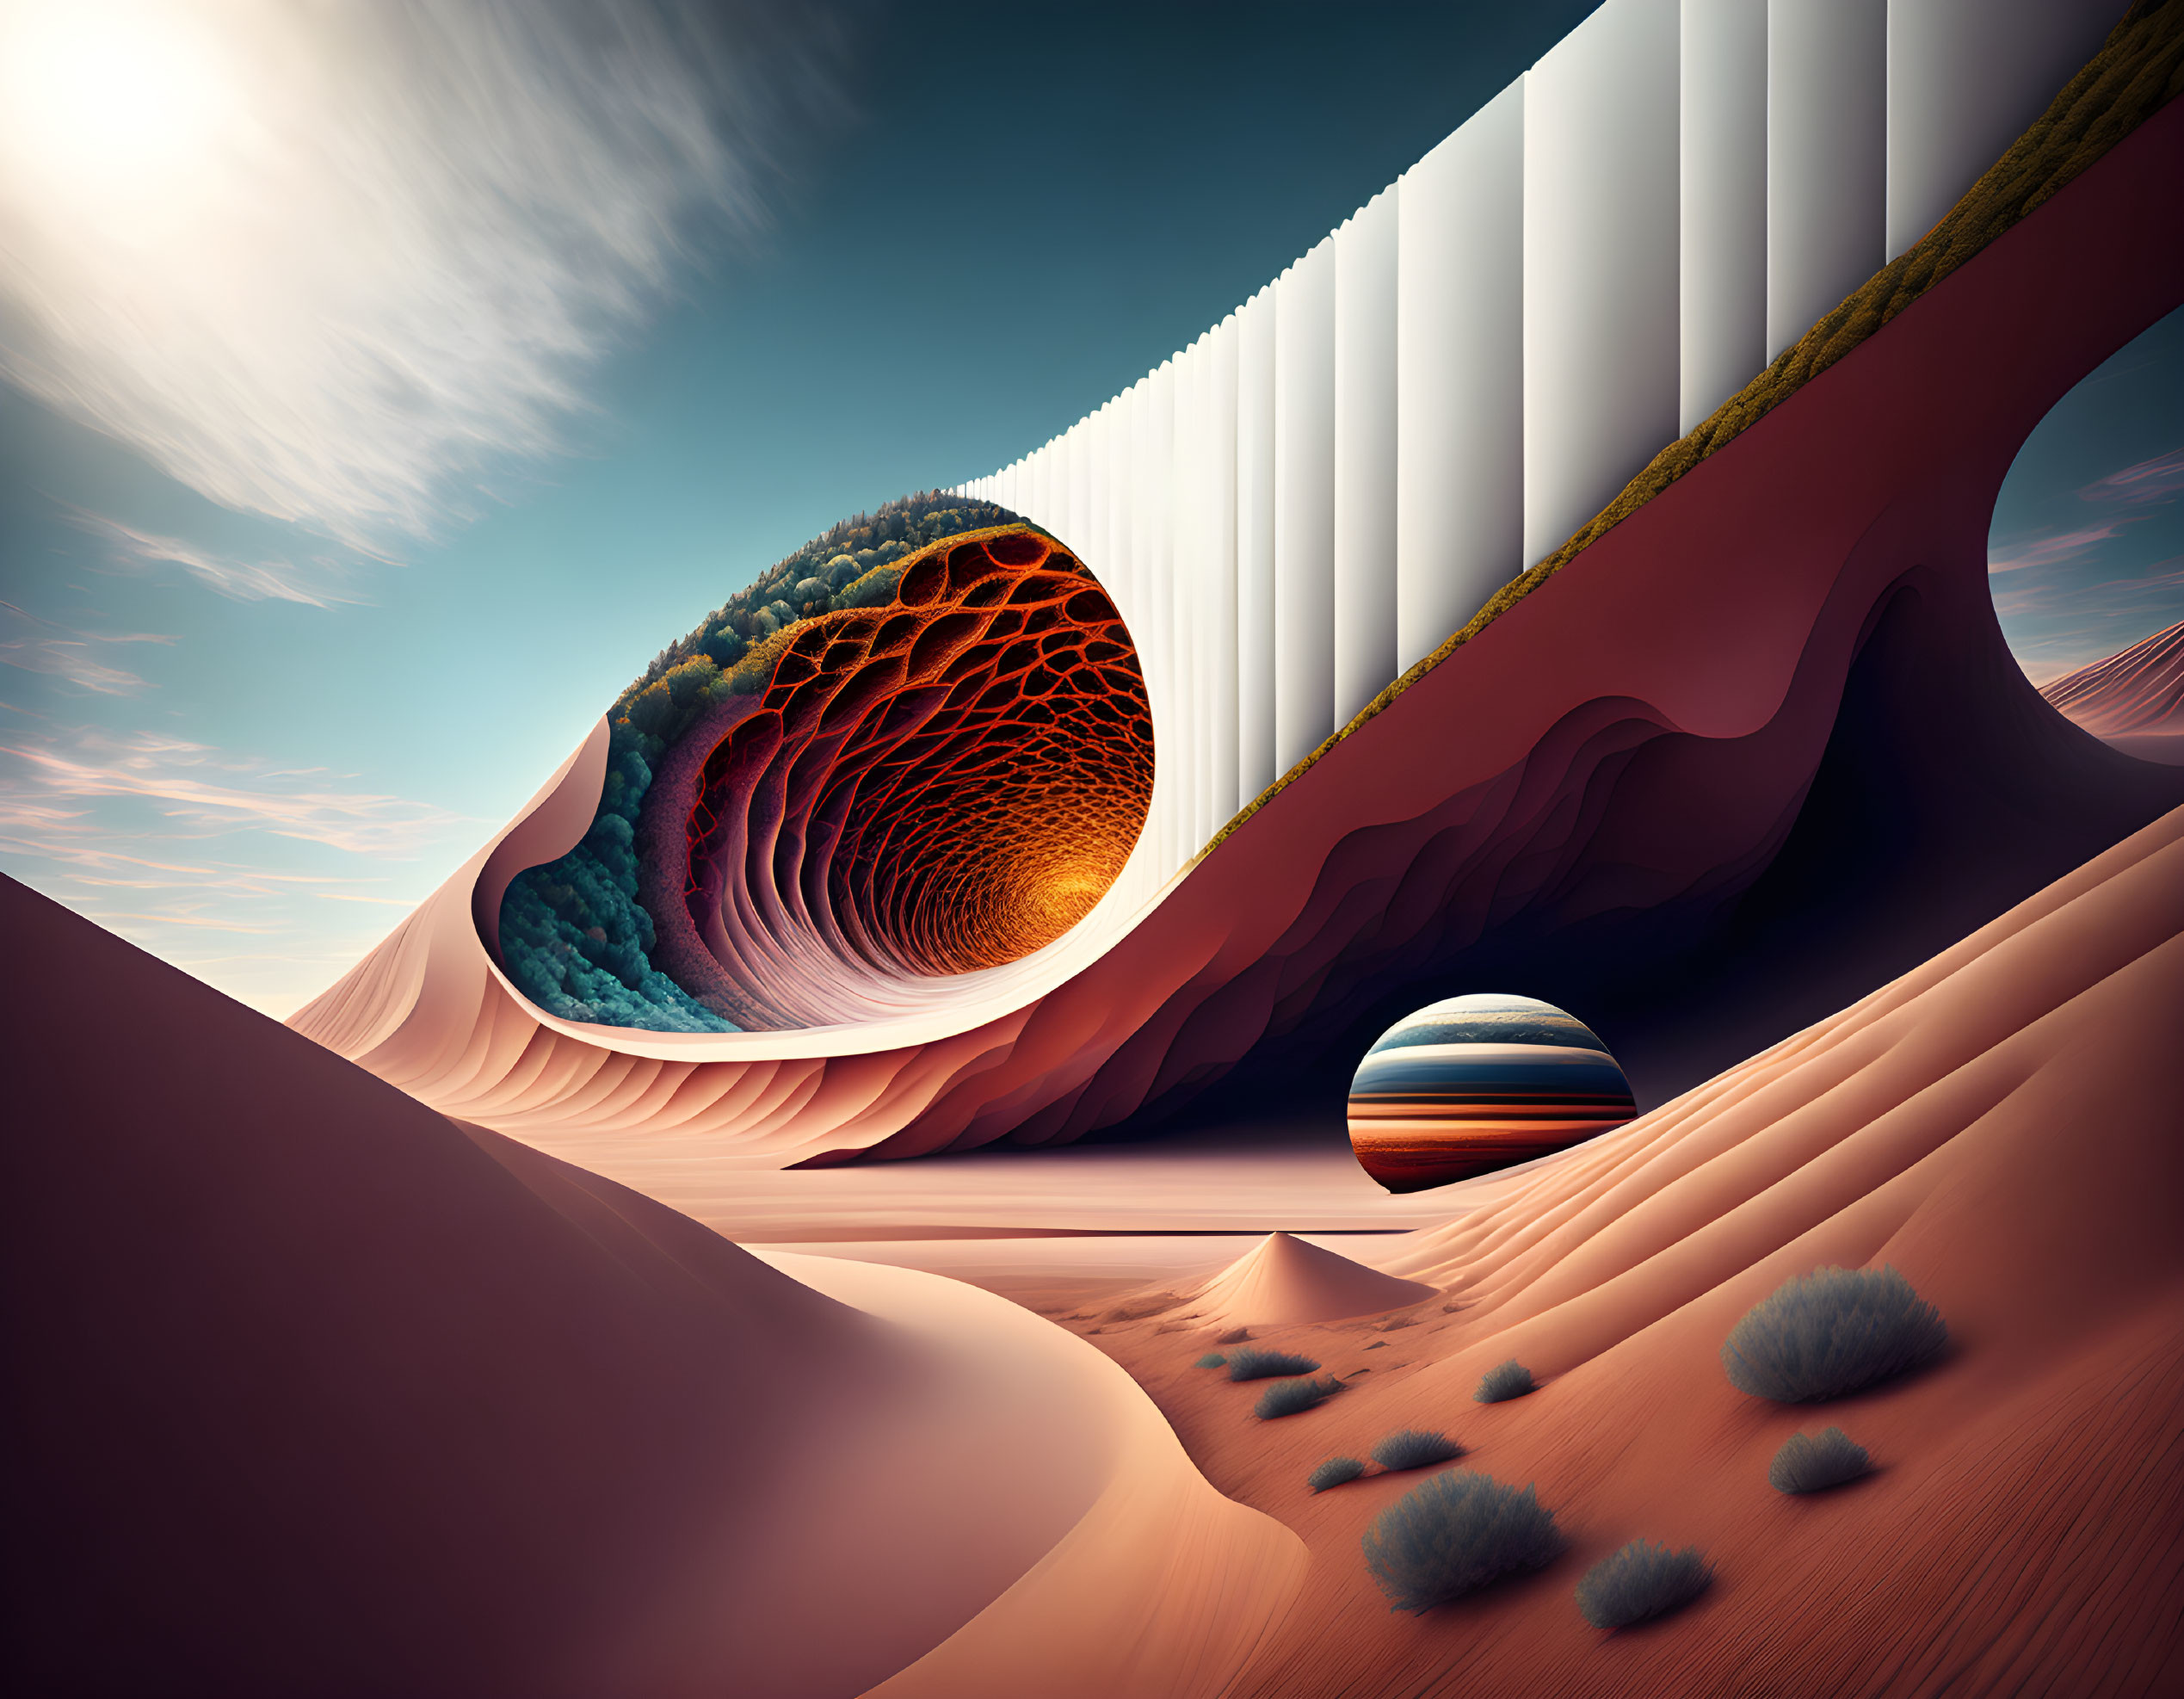 Surreal desert landscape with spherical structure and planet on horizon